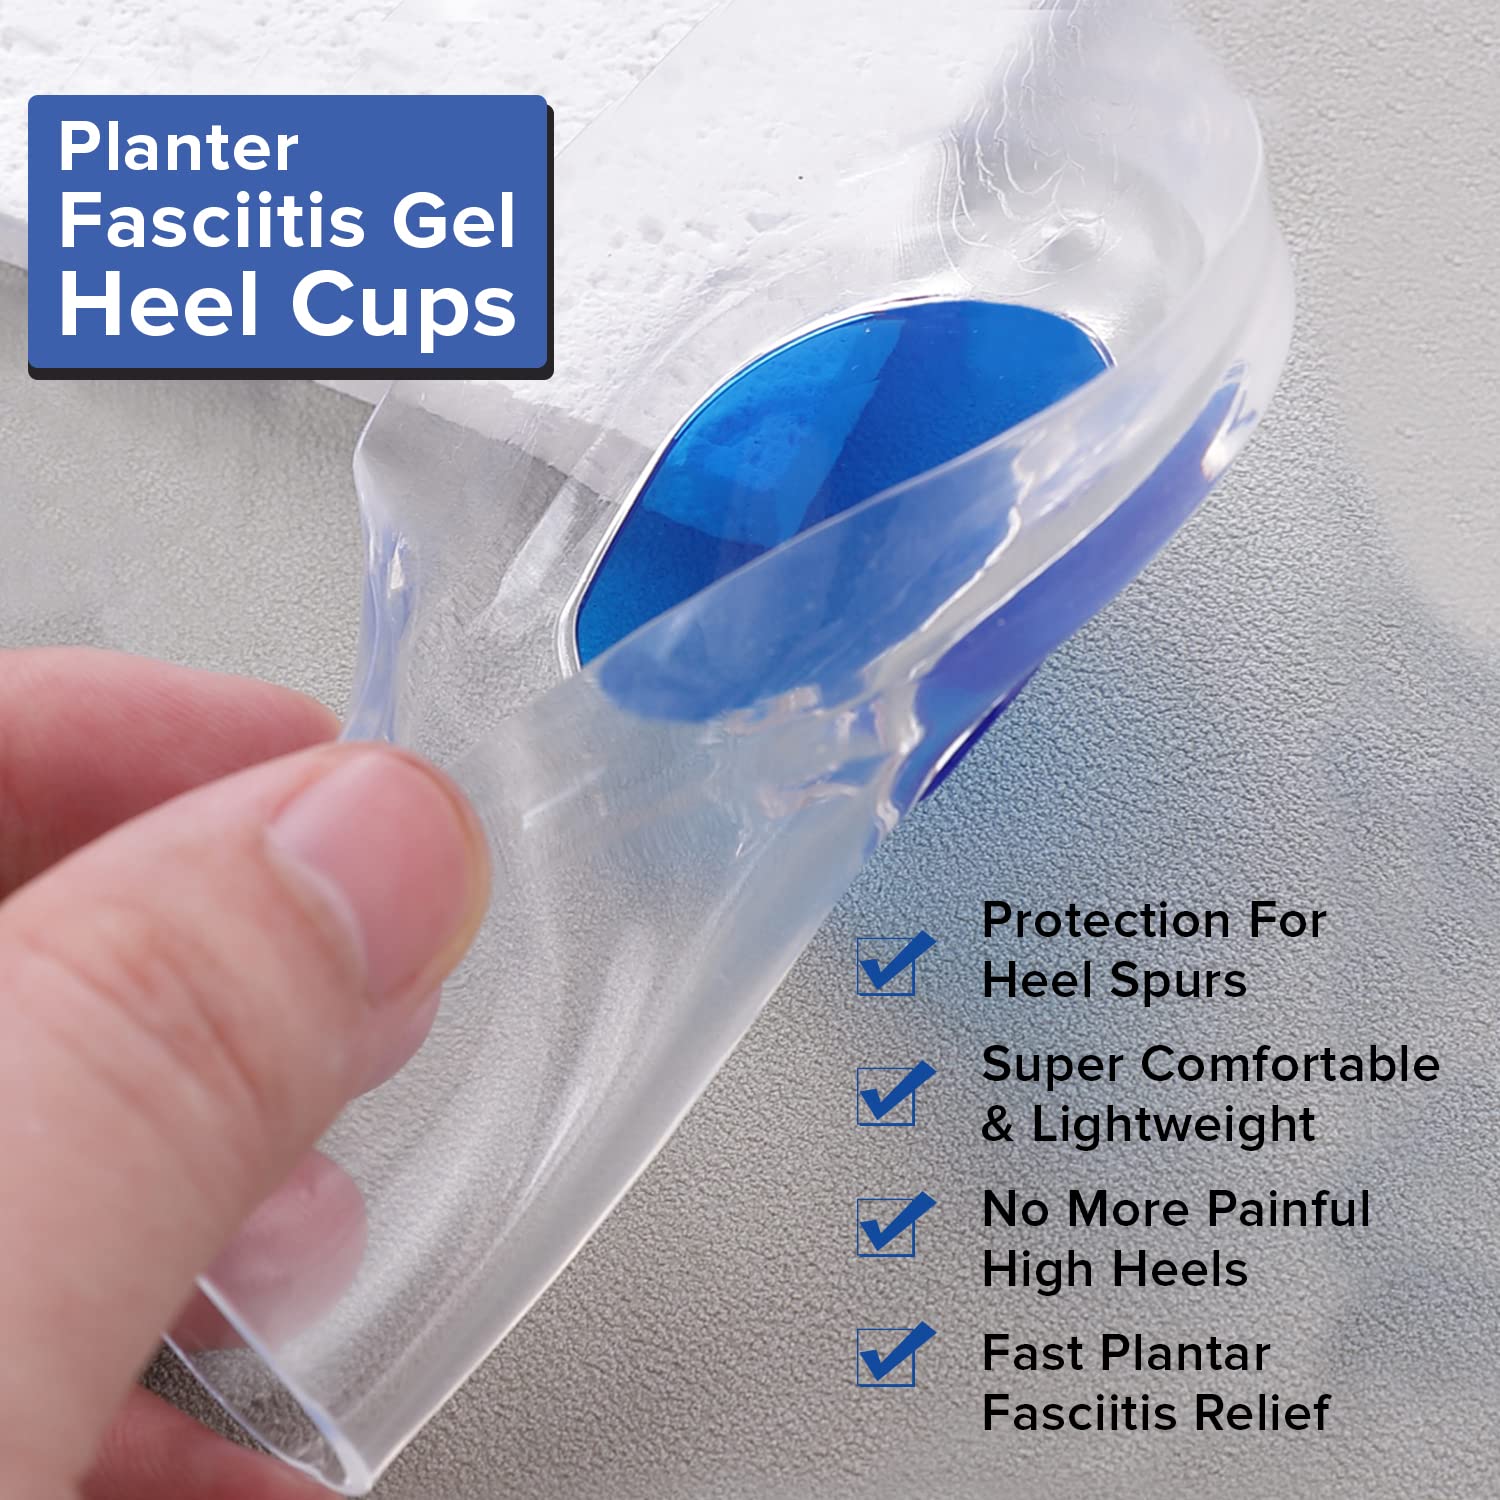 Dr Foot Silicone Gel Heel Cups With Shock Absorbing Support | For Plantar Fasciitis, Achilles Pain, Orthotic Inserts, Heel Cups For Heel Pain & Spurs| For Men & Women (Size - L) (Pack of 2)